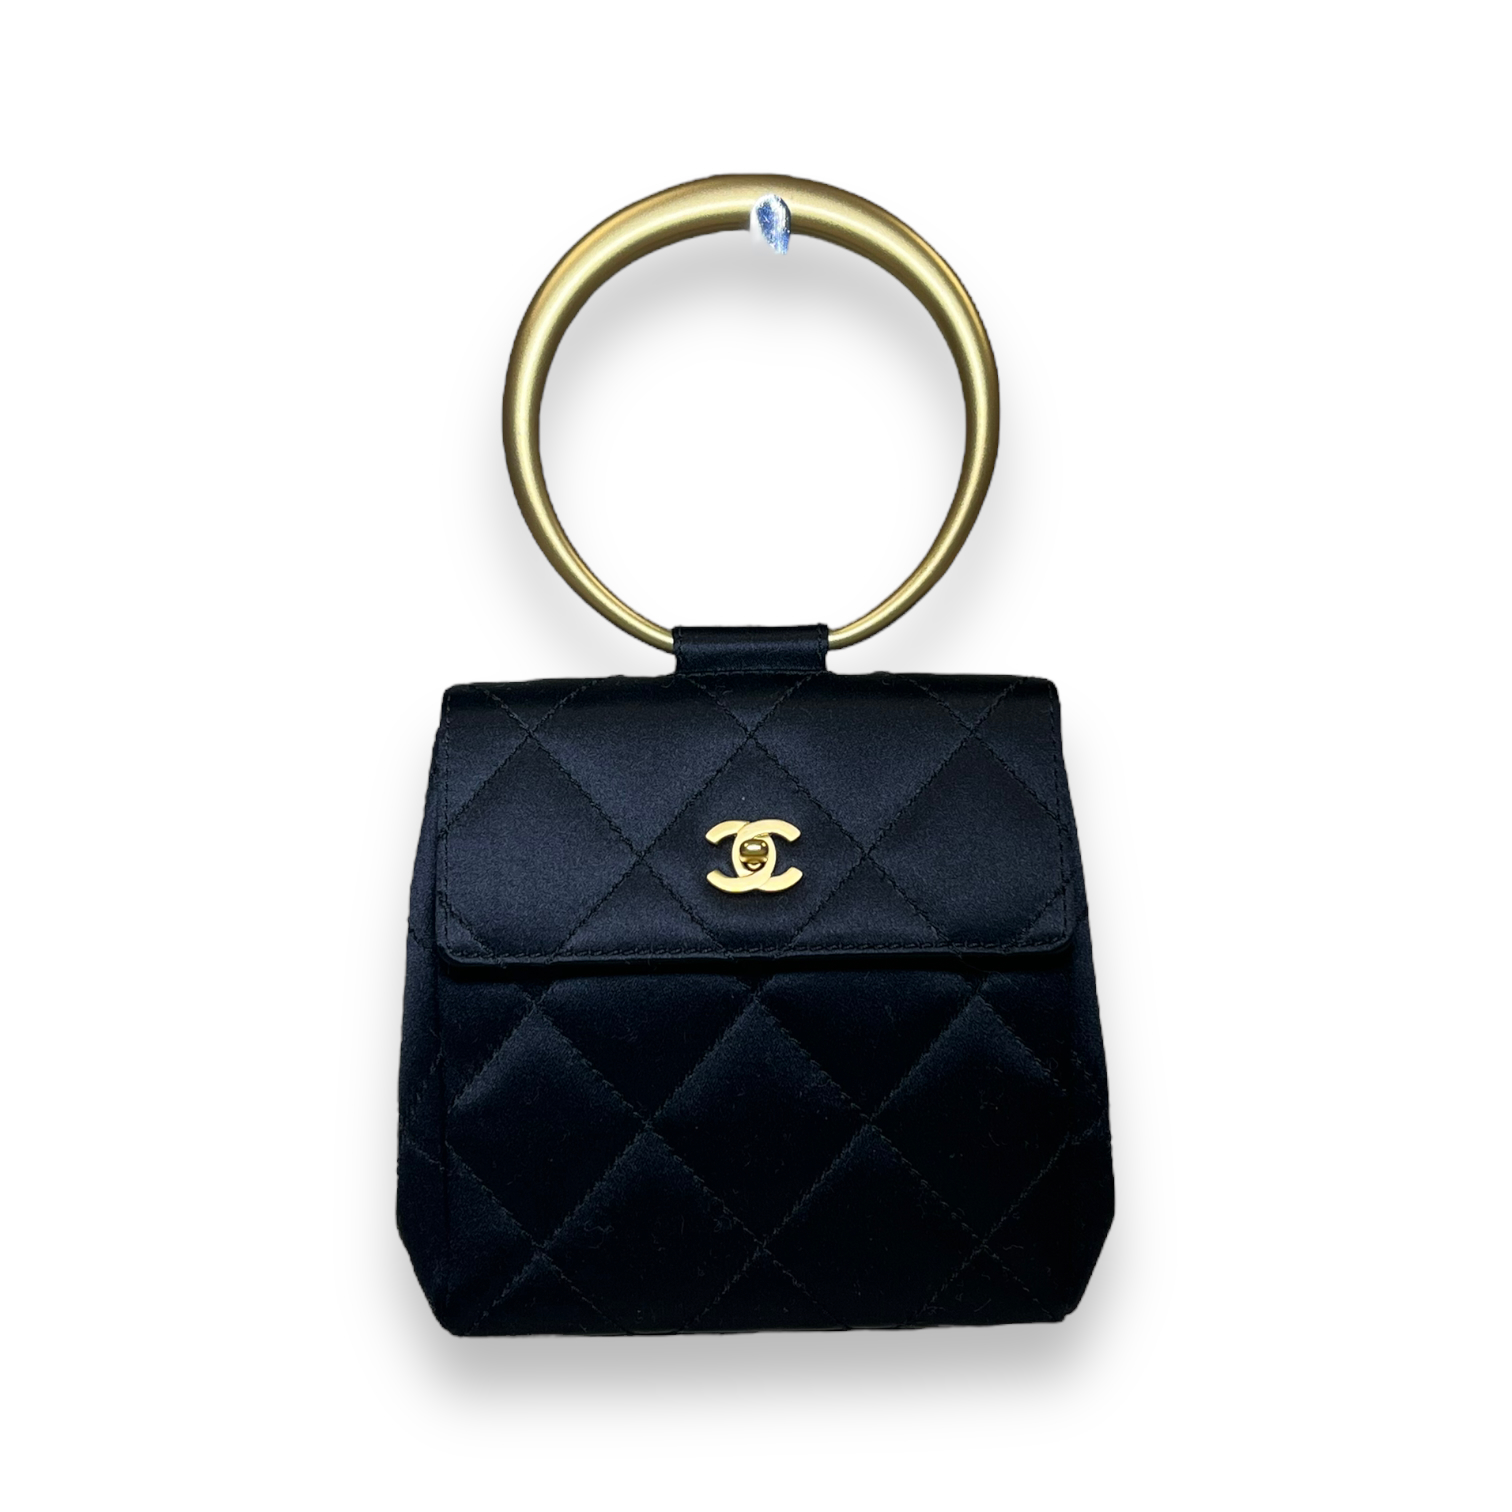 Chanel Vintage Metallic Gold Quilted Lambskin CC Top Handle Mini